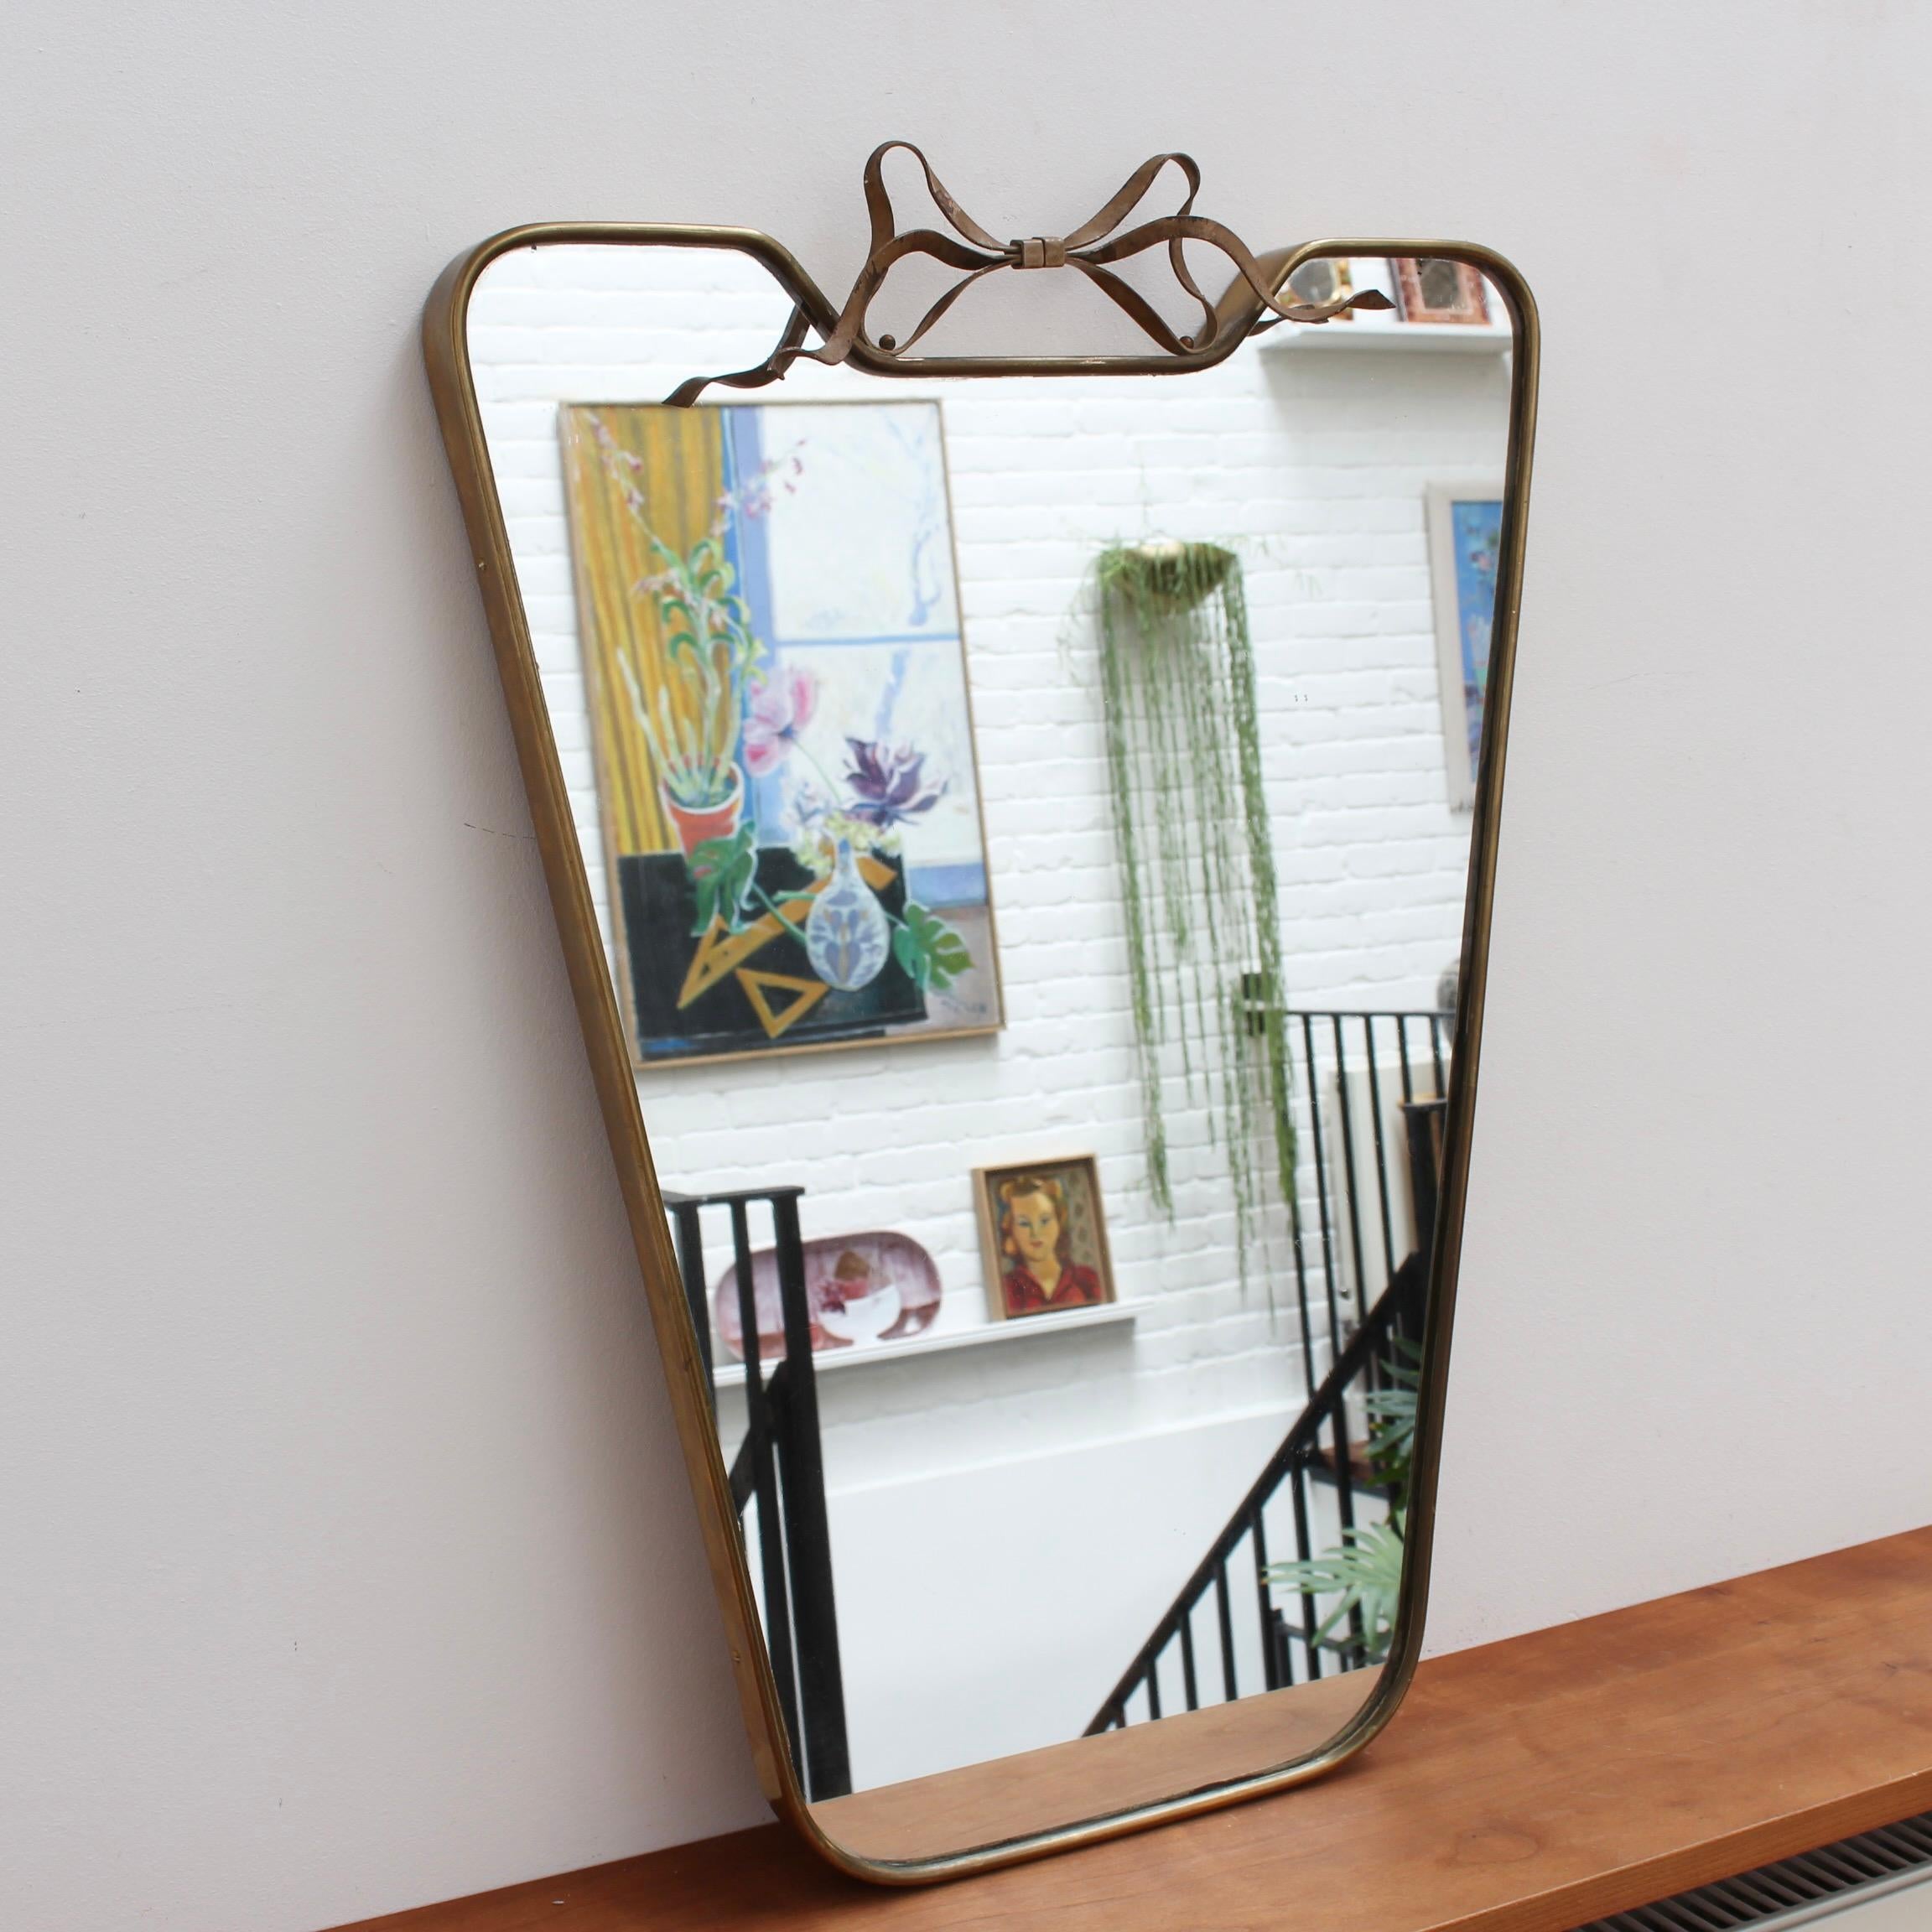 Mid-century Italian wall mirror with brass frame and top flourish (circa 1950s). This mirror is simply elegant and characterful in a modern, Gio Ponti style. It is classically-shaped presenting a charming top flourish in the form of a ribbon. The